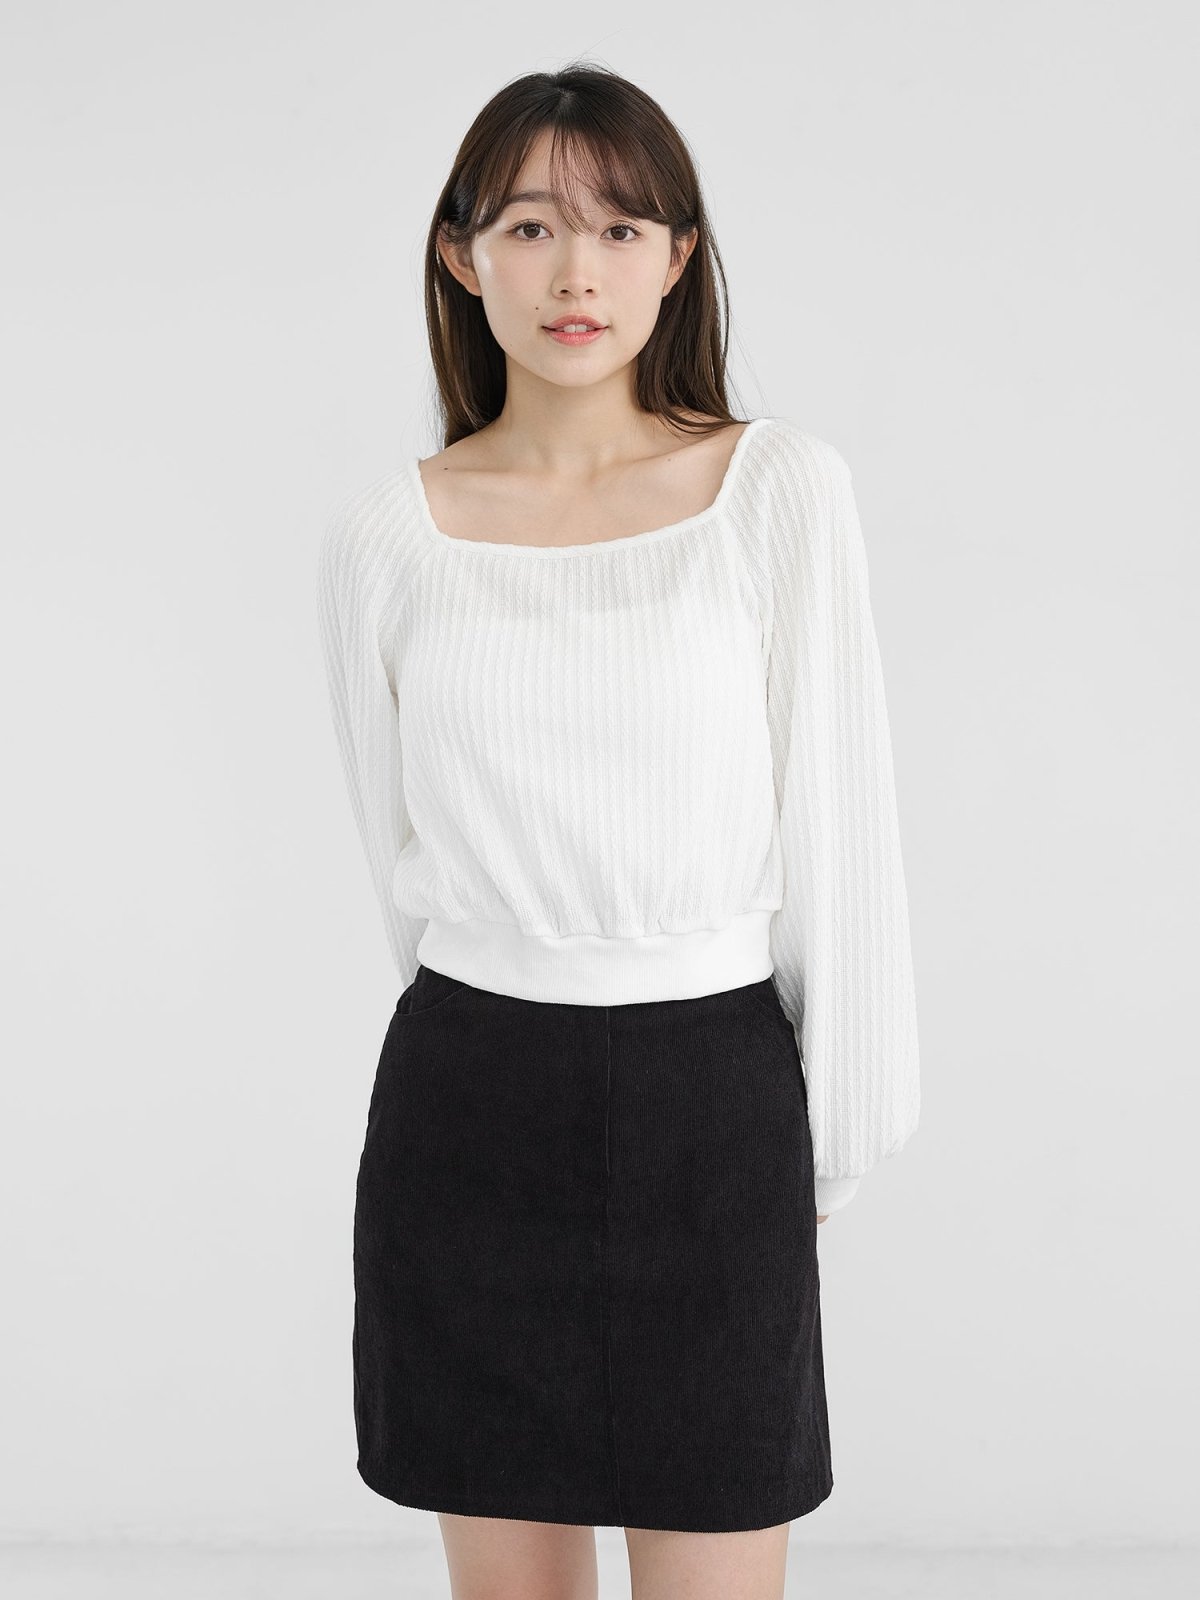 Winter Cable-knit Square Neck Top - DAG-DD1297-23IvoryS - Ivory - S - D'zage Designs